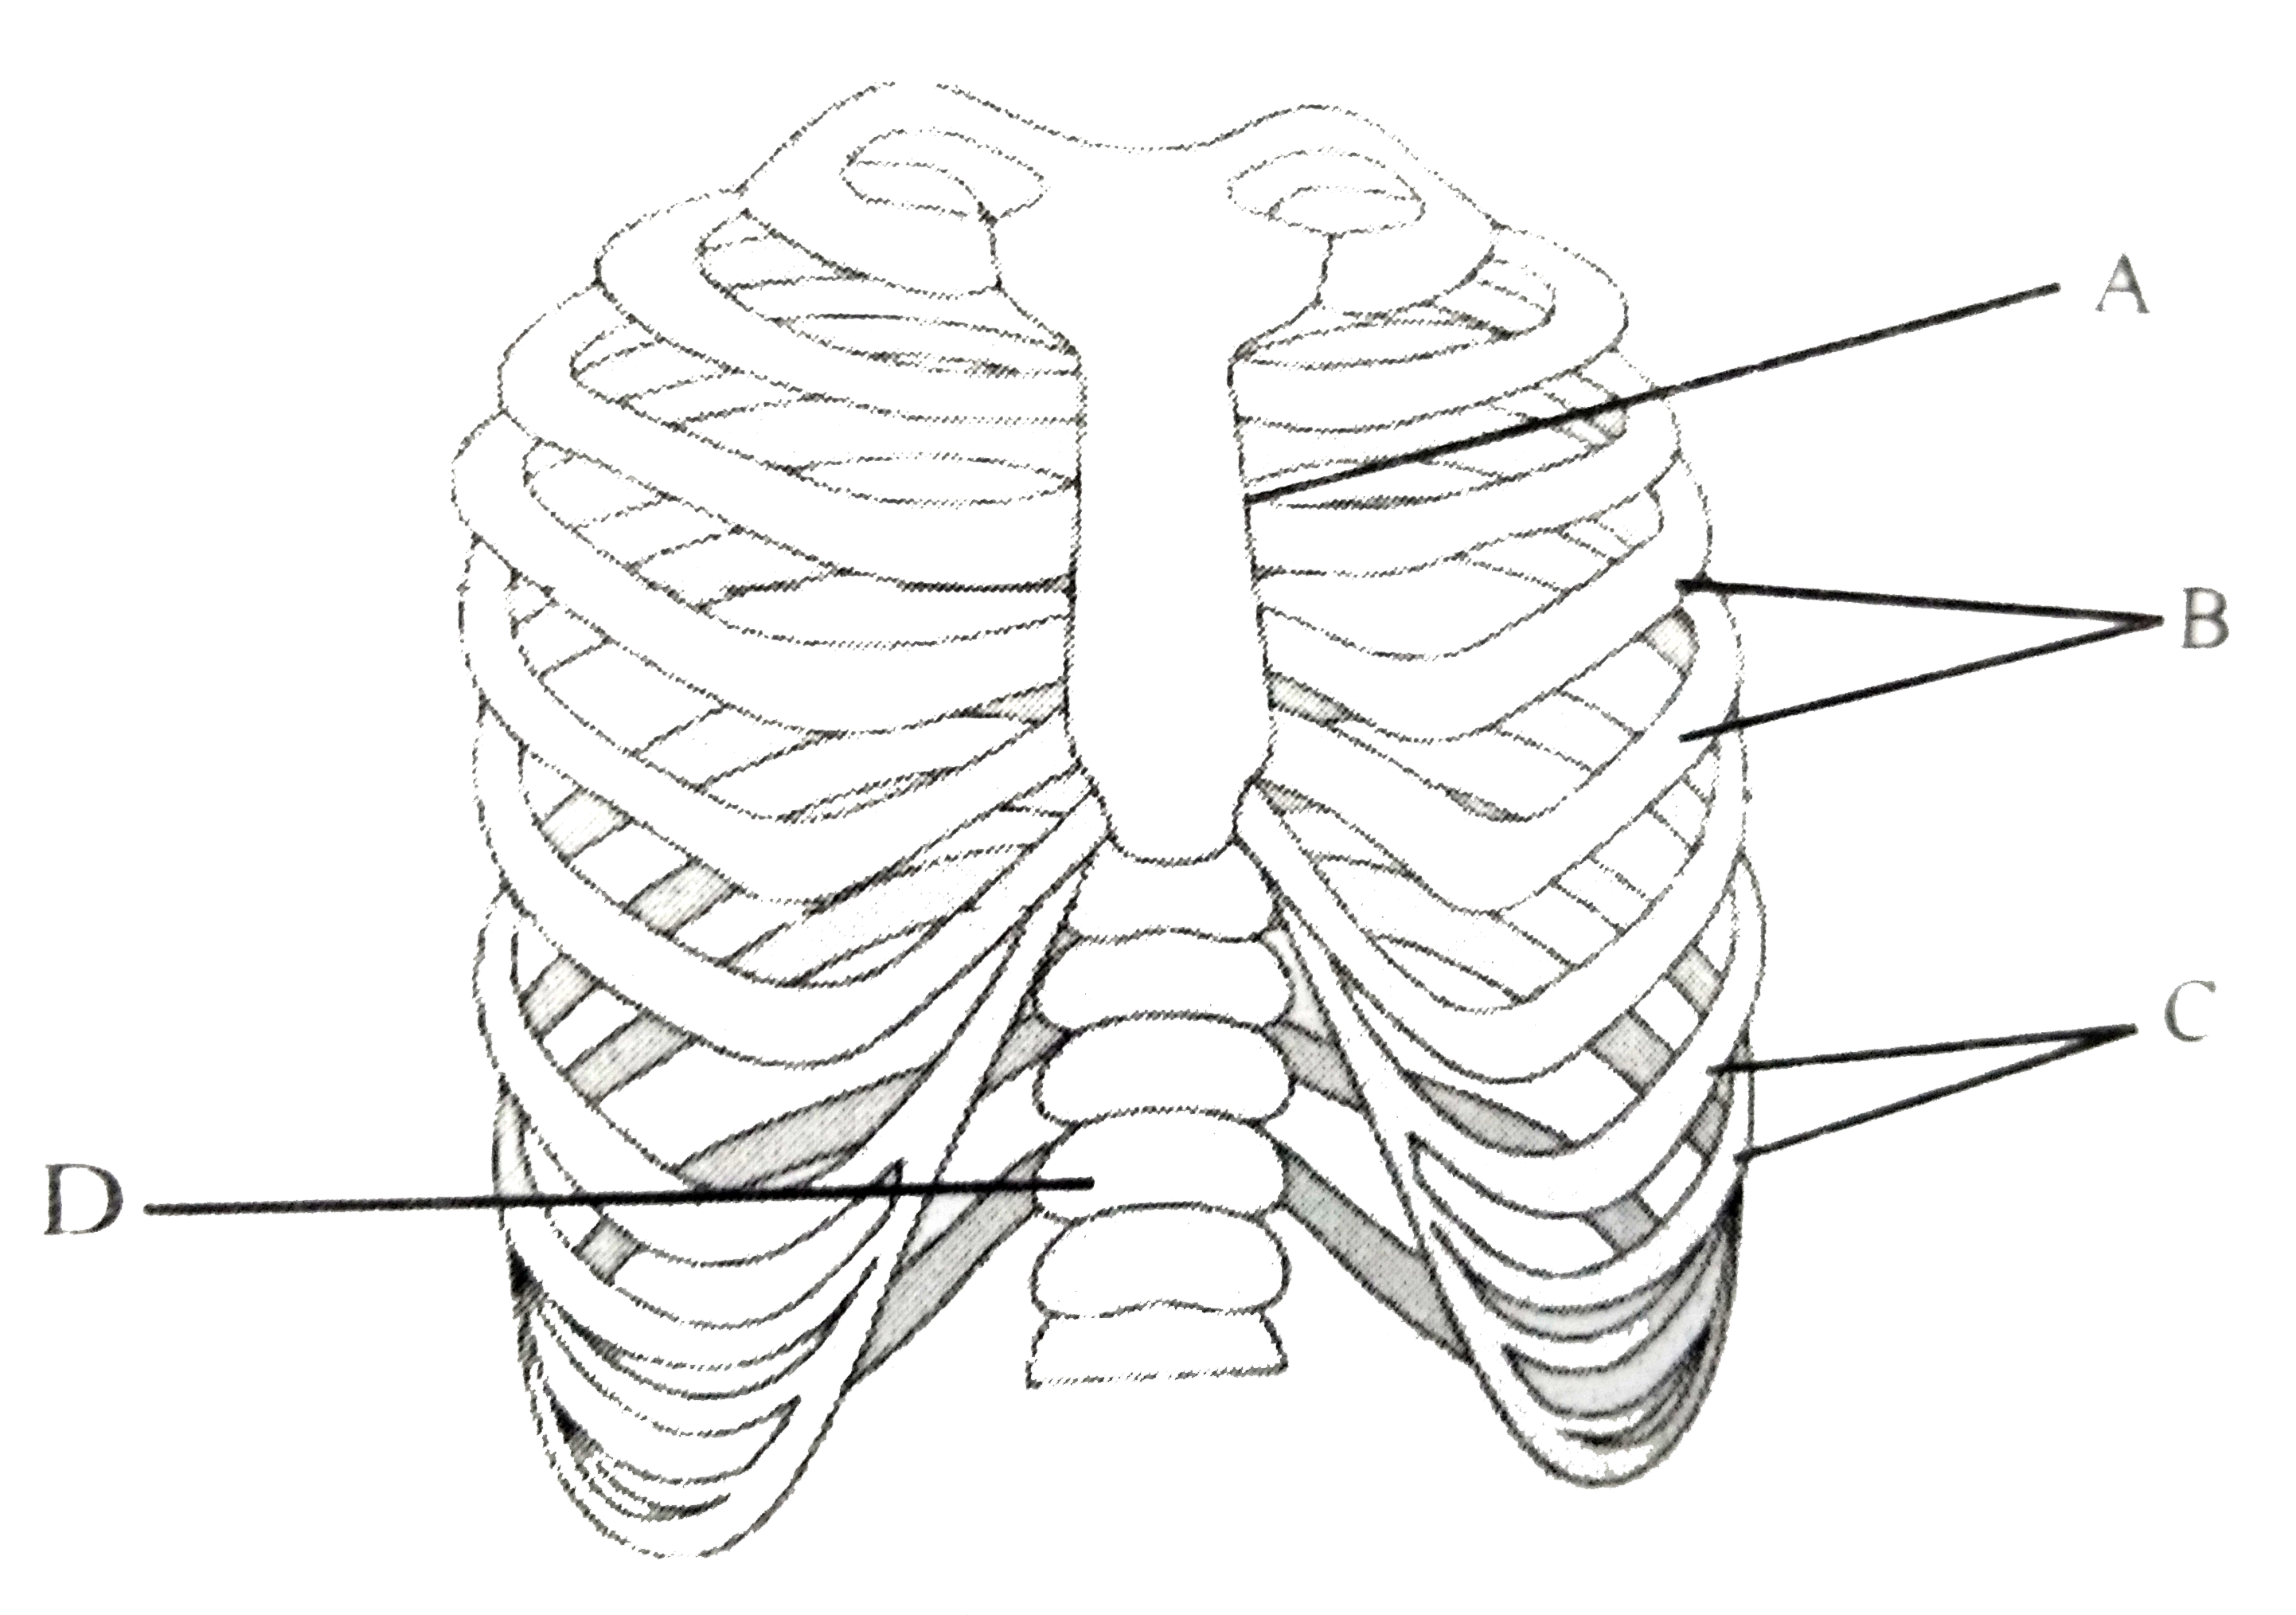 The figure shows ribs and rib cage labelled with A,B,C and D. select the option which gives correct identification :-